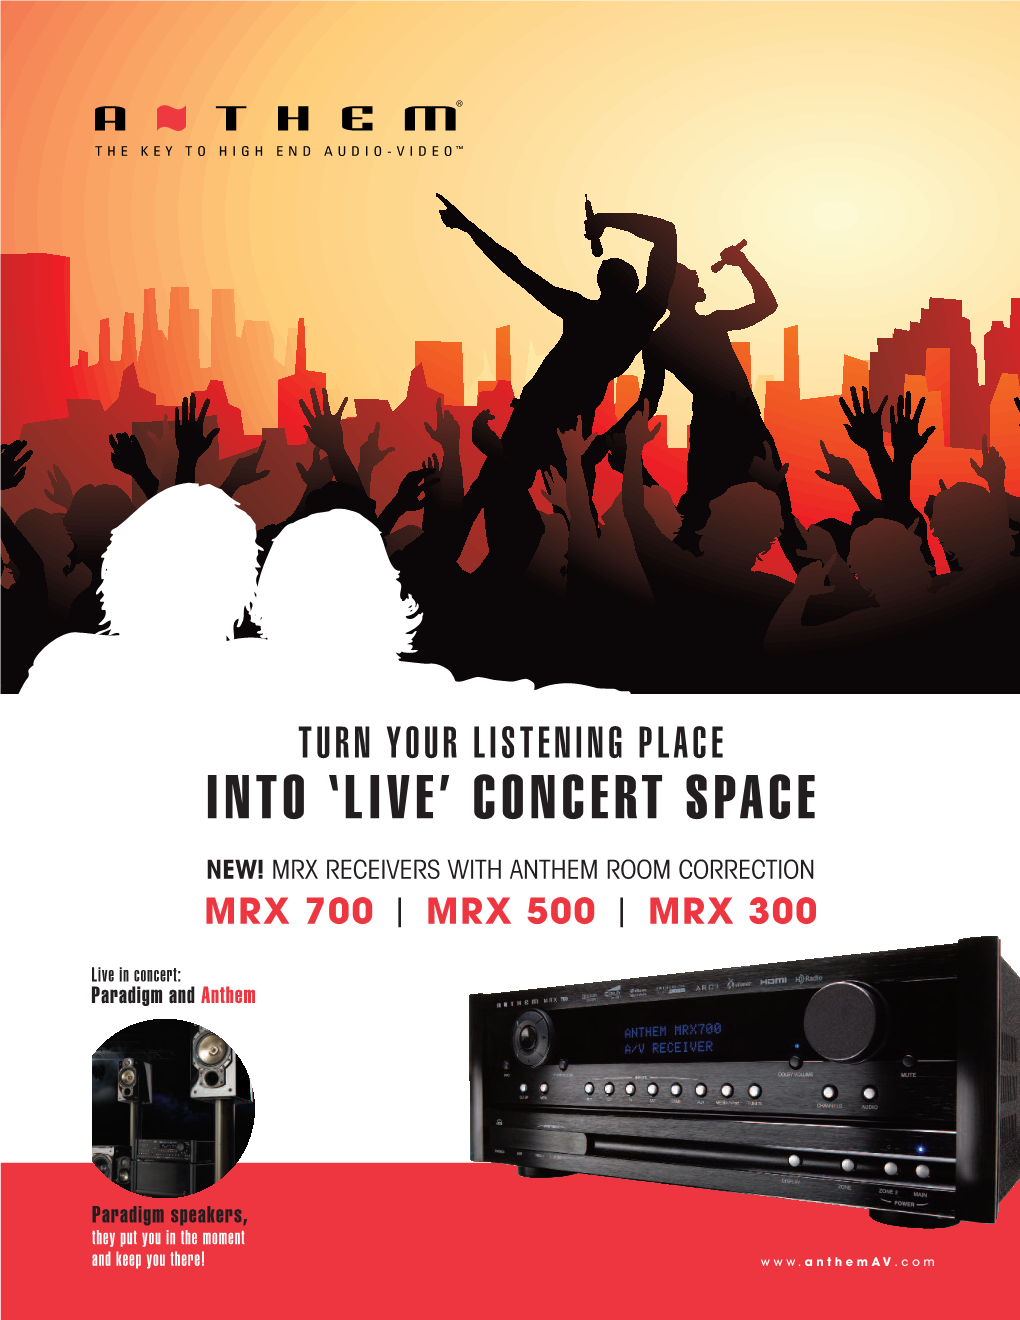 Into 'Live' Concert Space